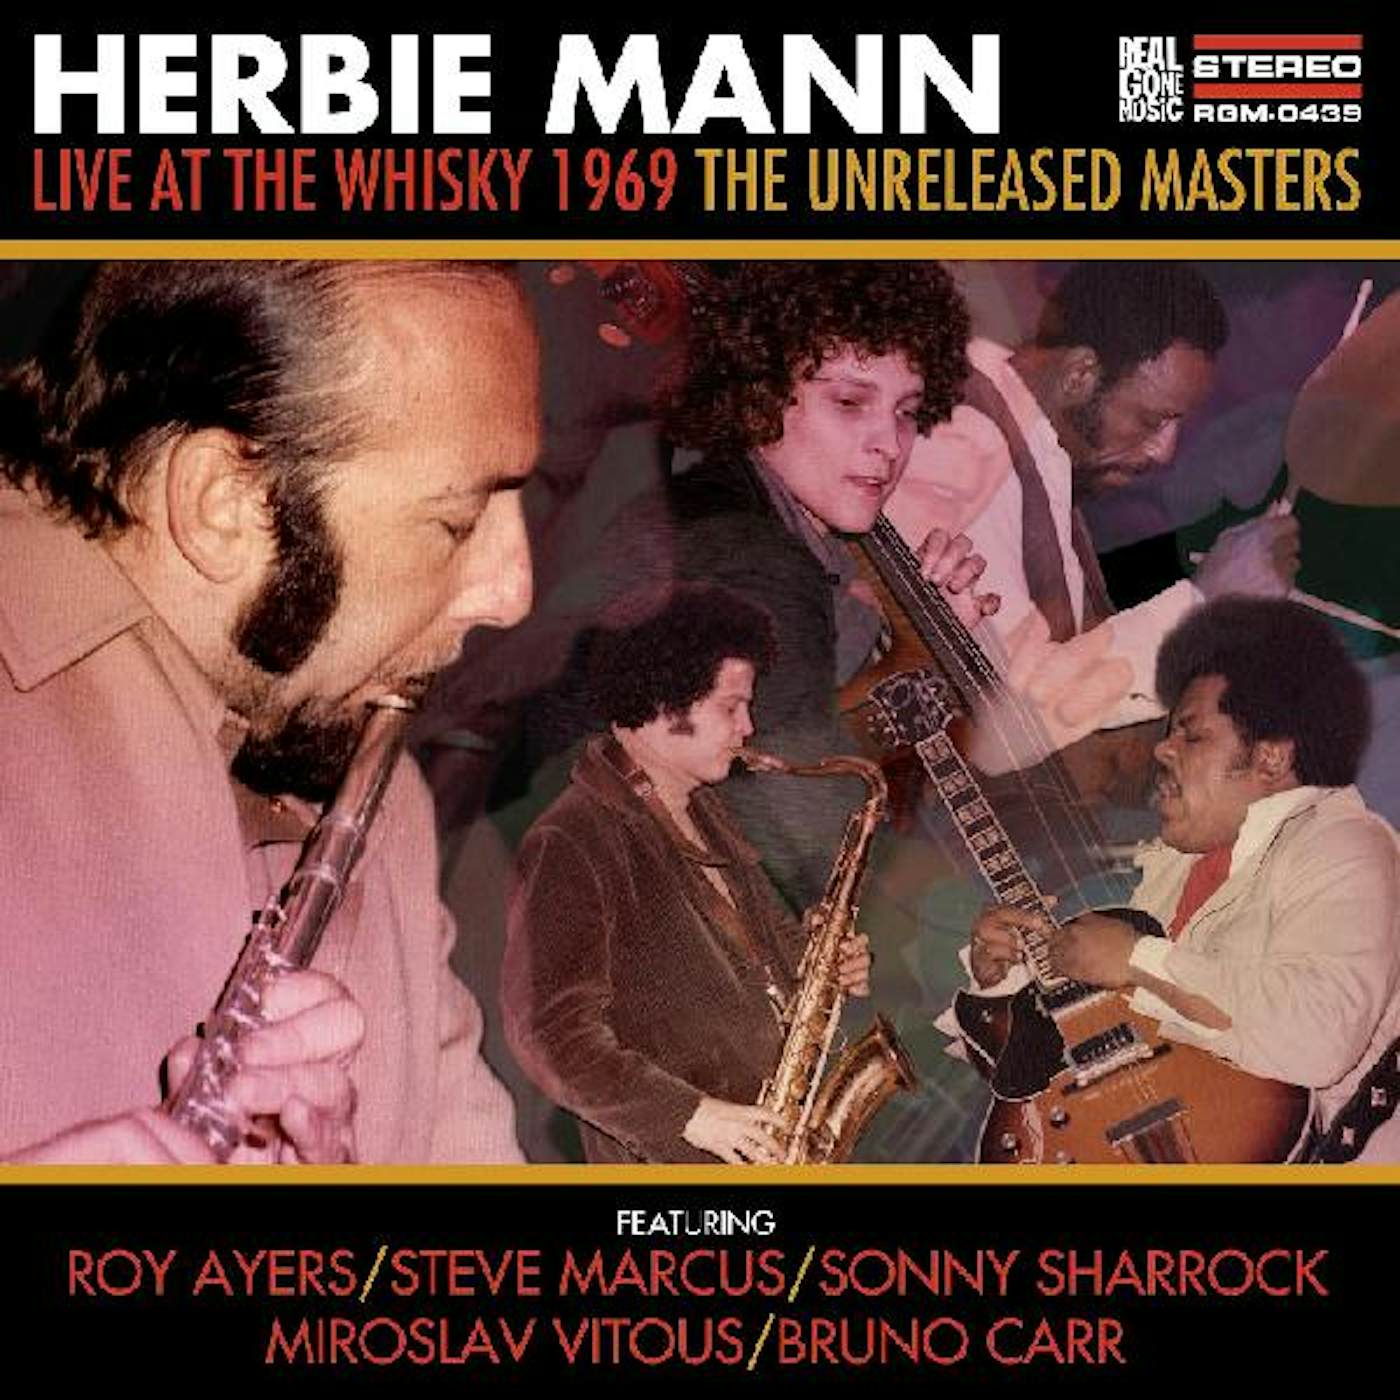 Herbie Mann LIVE AT THE WHISKY 1969: UNRELEASED MASTERS (2CD) CD